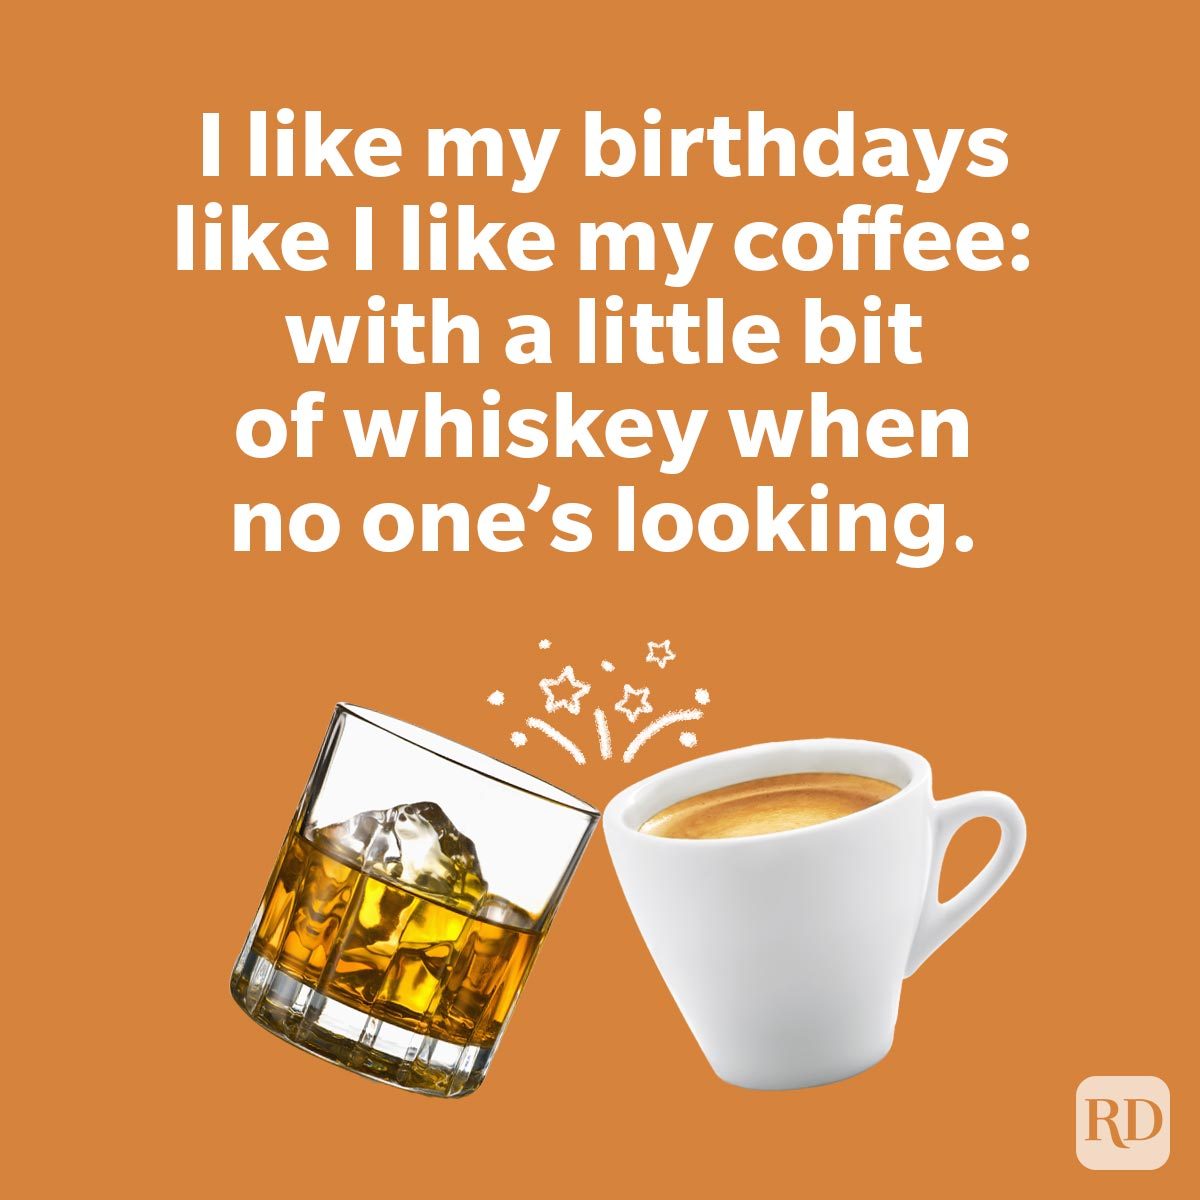 Birthday Jokes That Are Better Than Cake of a whiskey glass and a coffee mug clinking on orange background